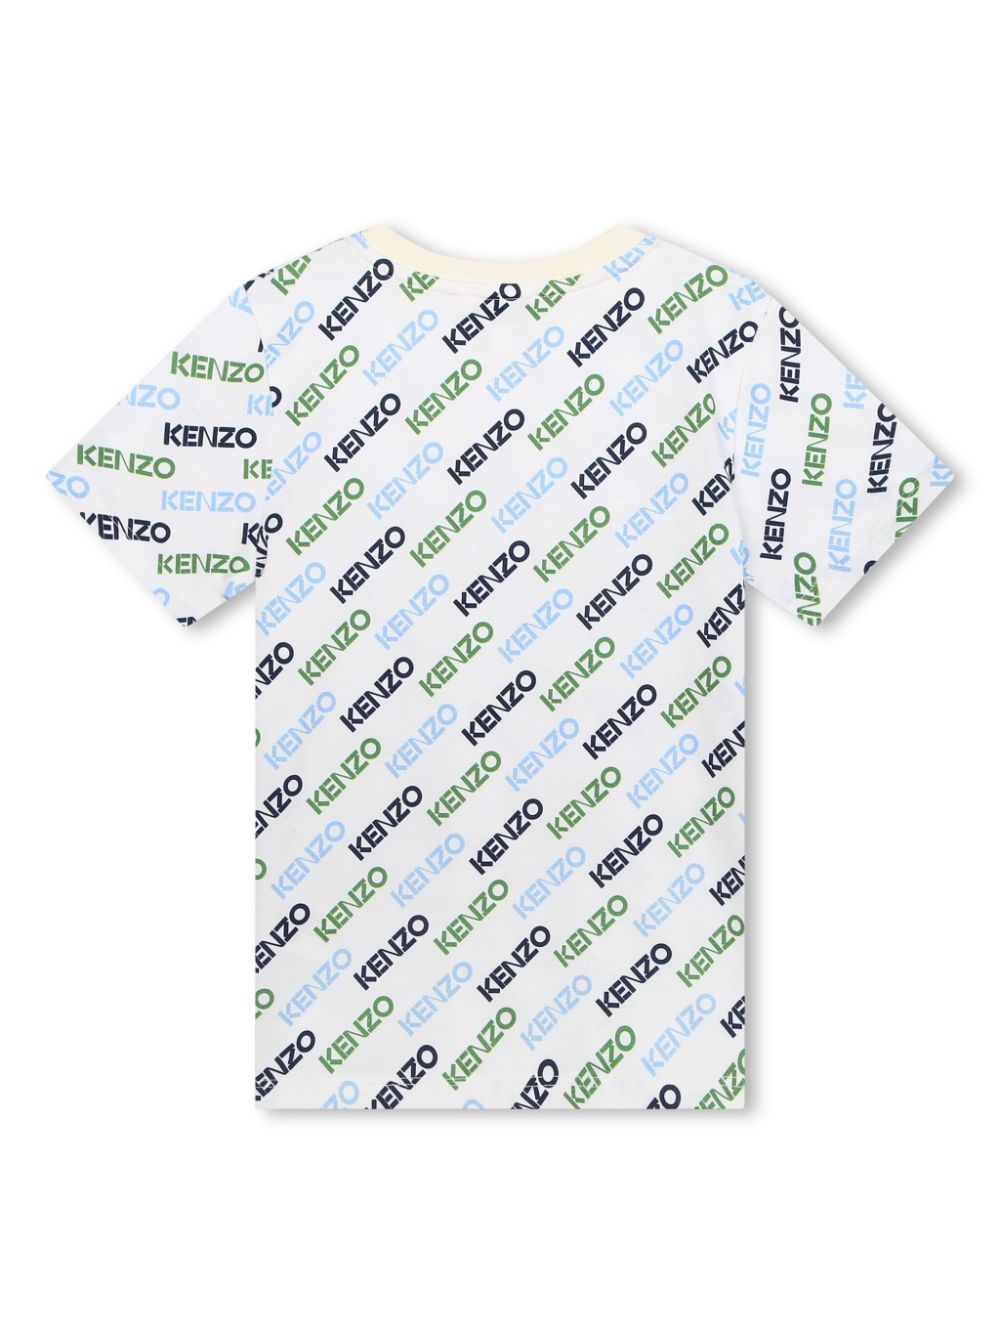 White t-shirt for boys with all-over logo